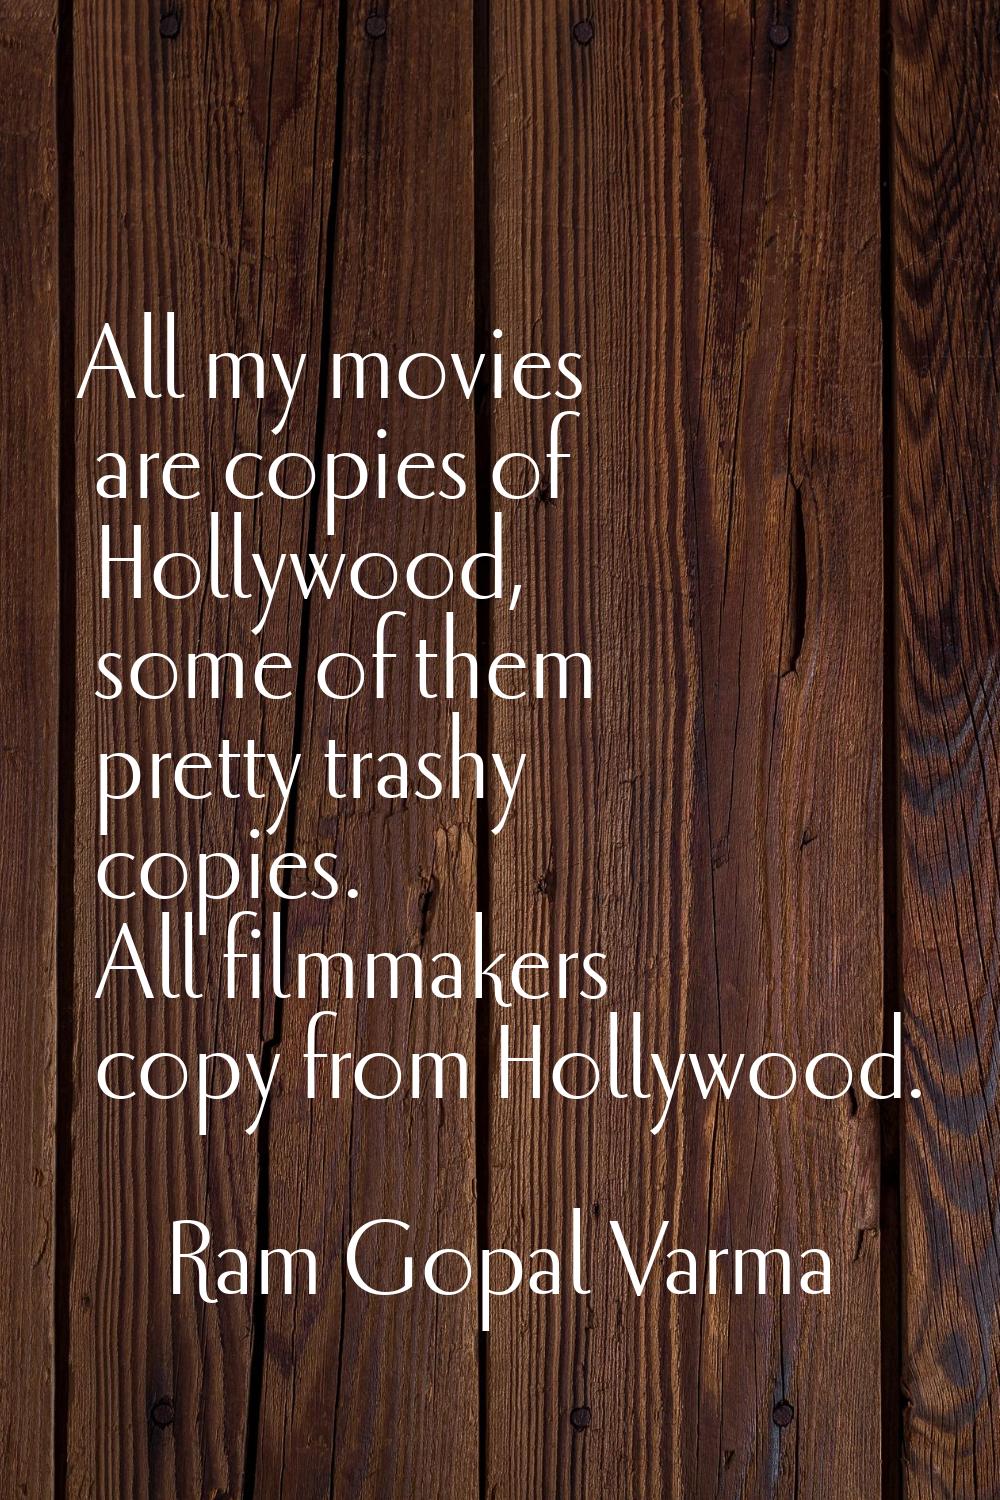 All my movies are copies of Hollywood, some of them pretty trashy copies. All filmmakers copy from 